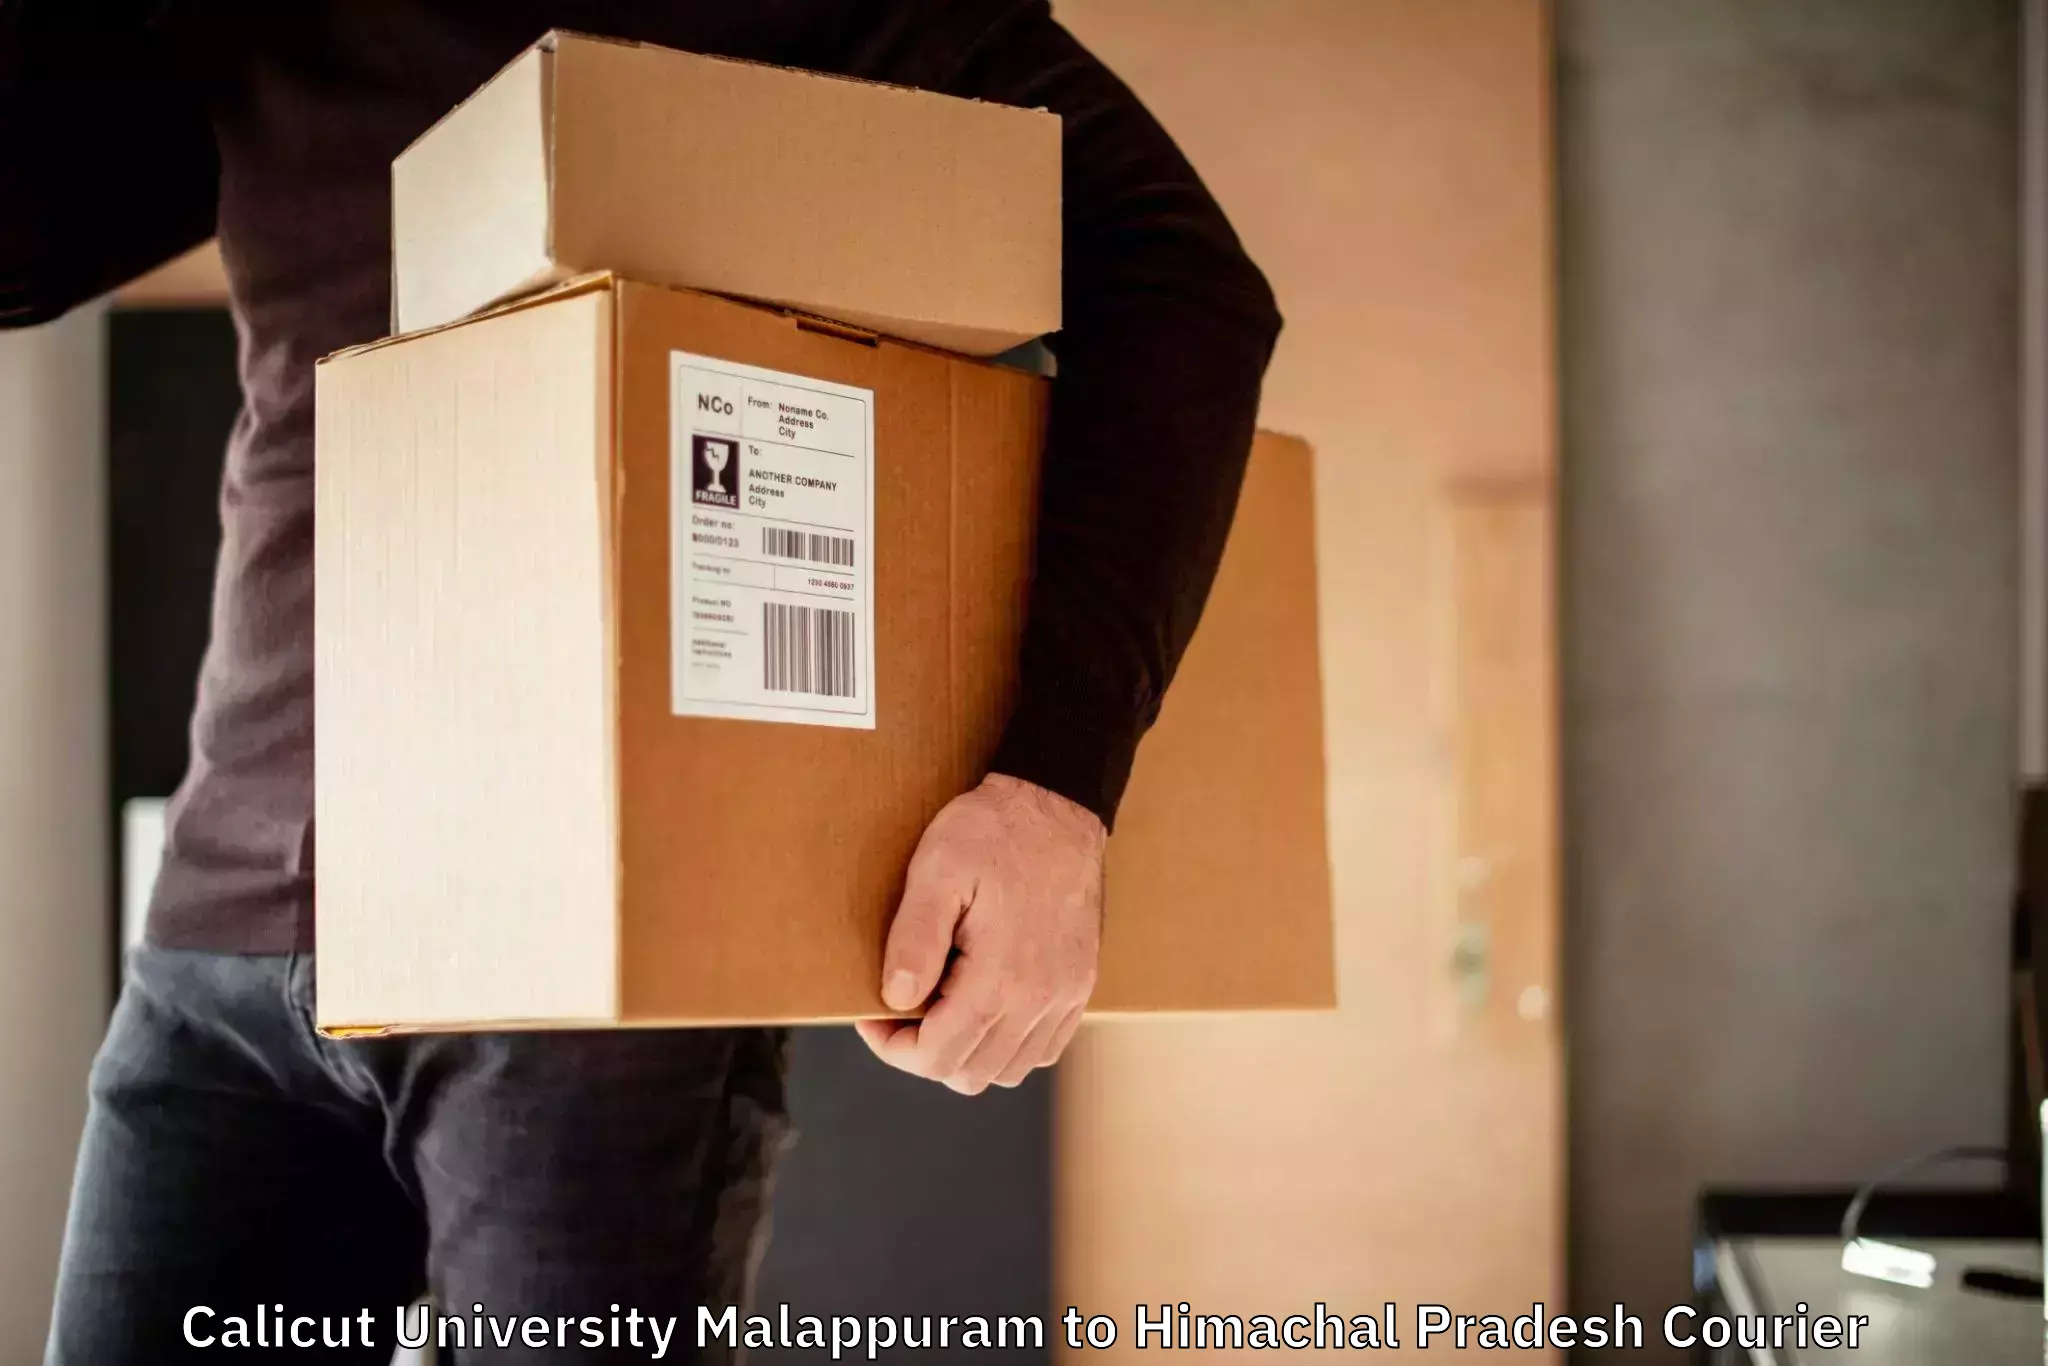 Dynamic courier services Calicut University Malappuram to Waknaghat